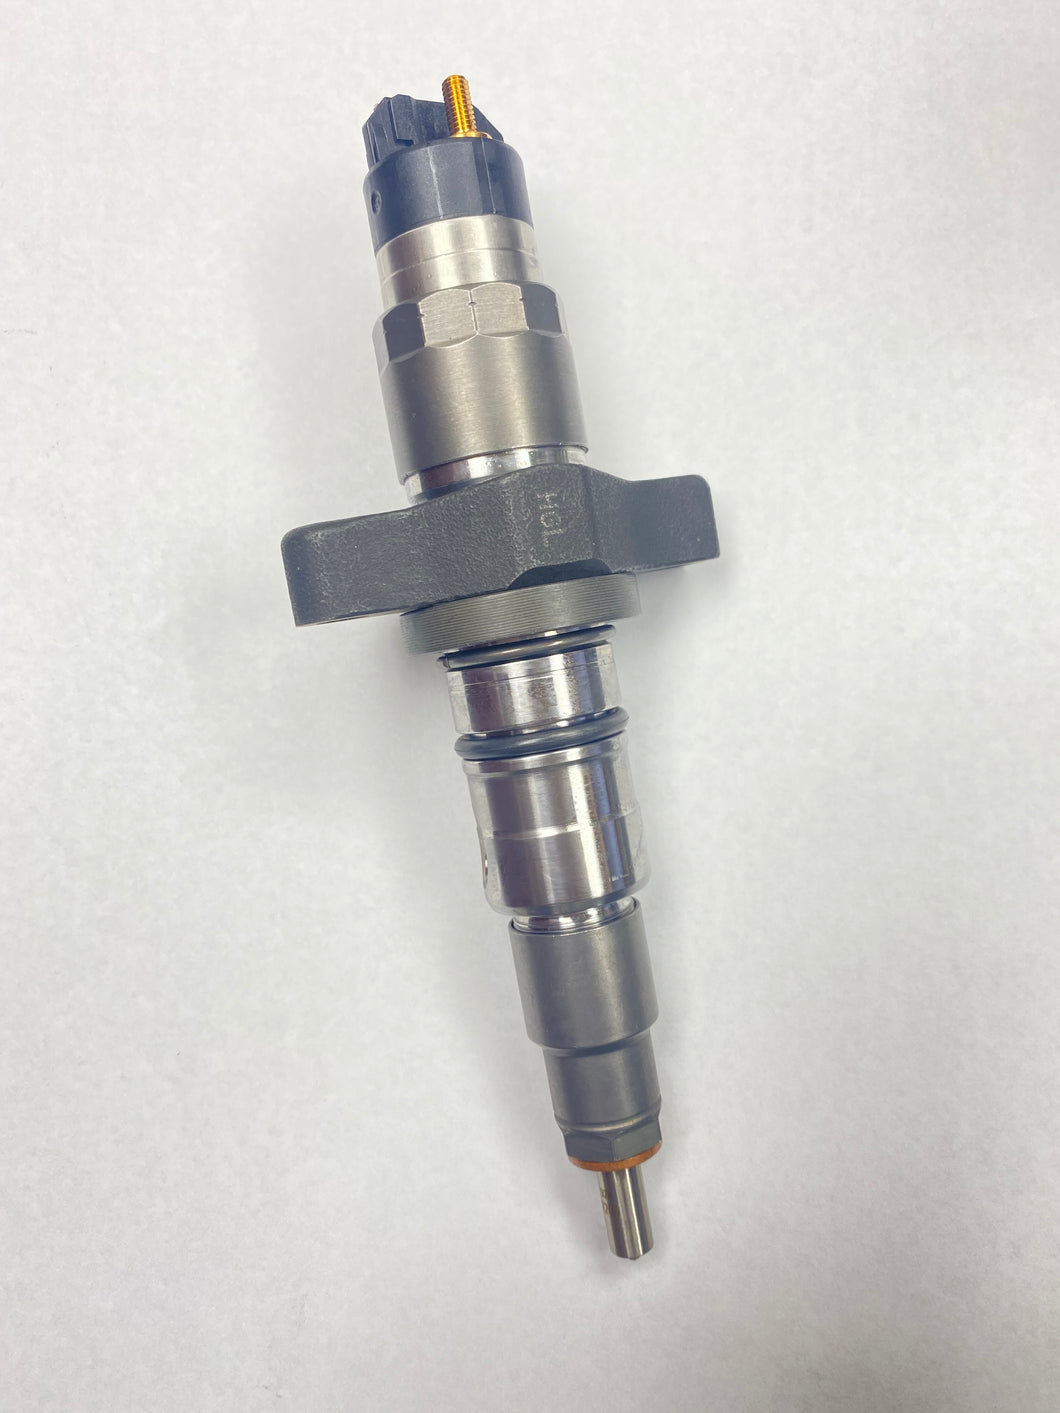 0-445-120-254 BOSCH INJECTOR | NEW| NO CORE CHARGE